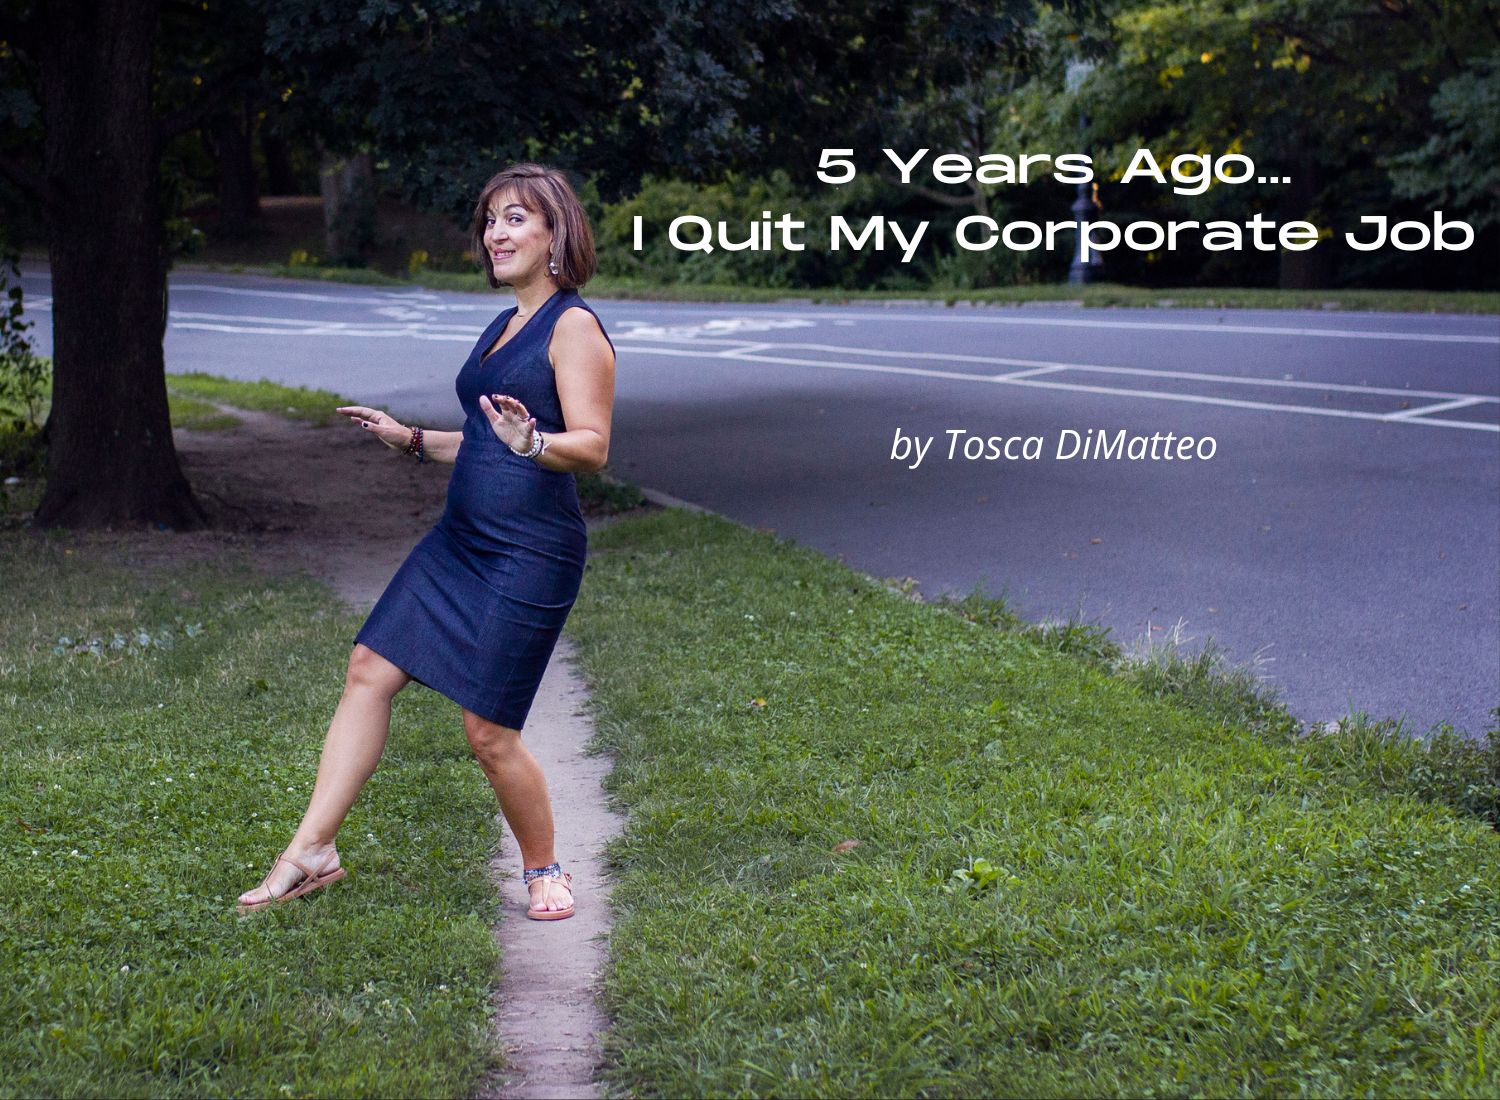 Five years ago I quit my corporate job…